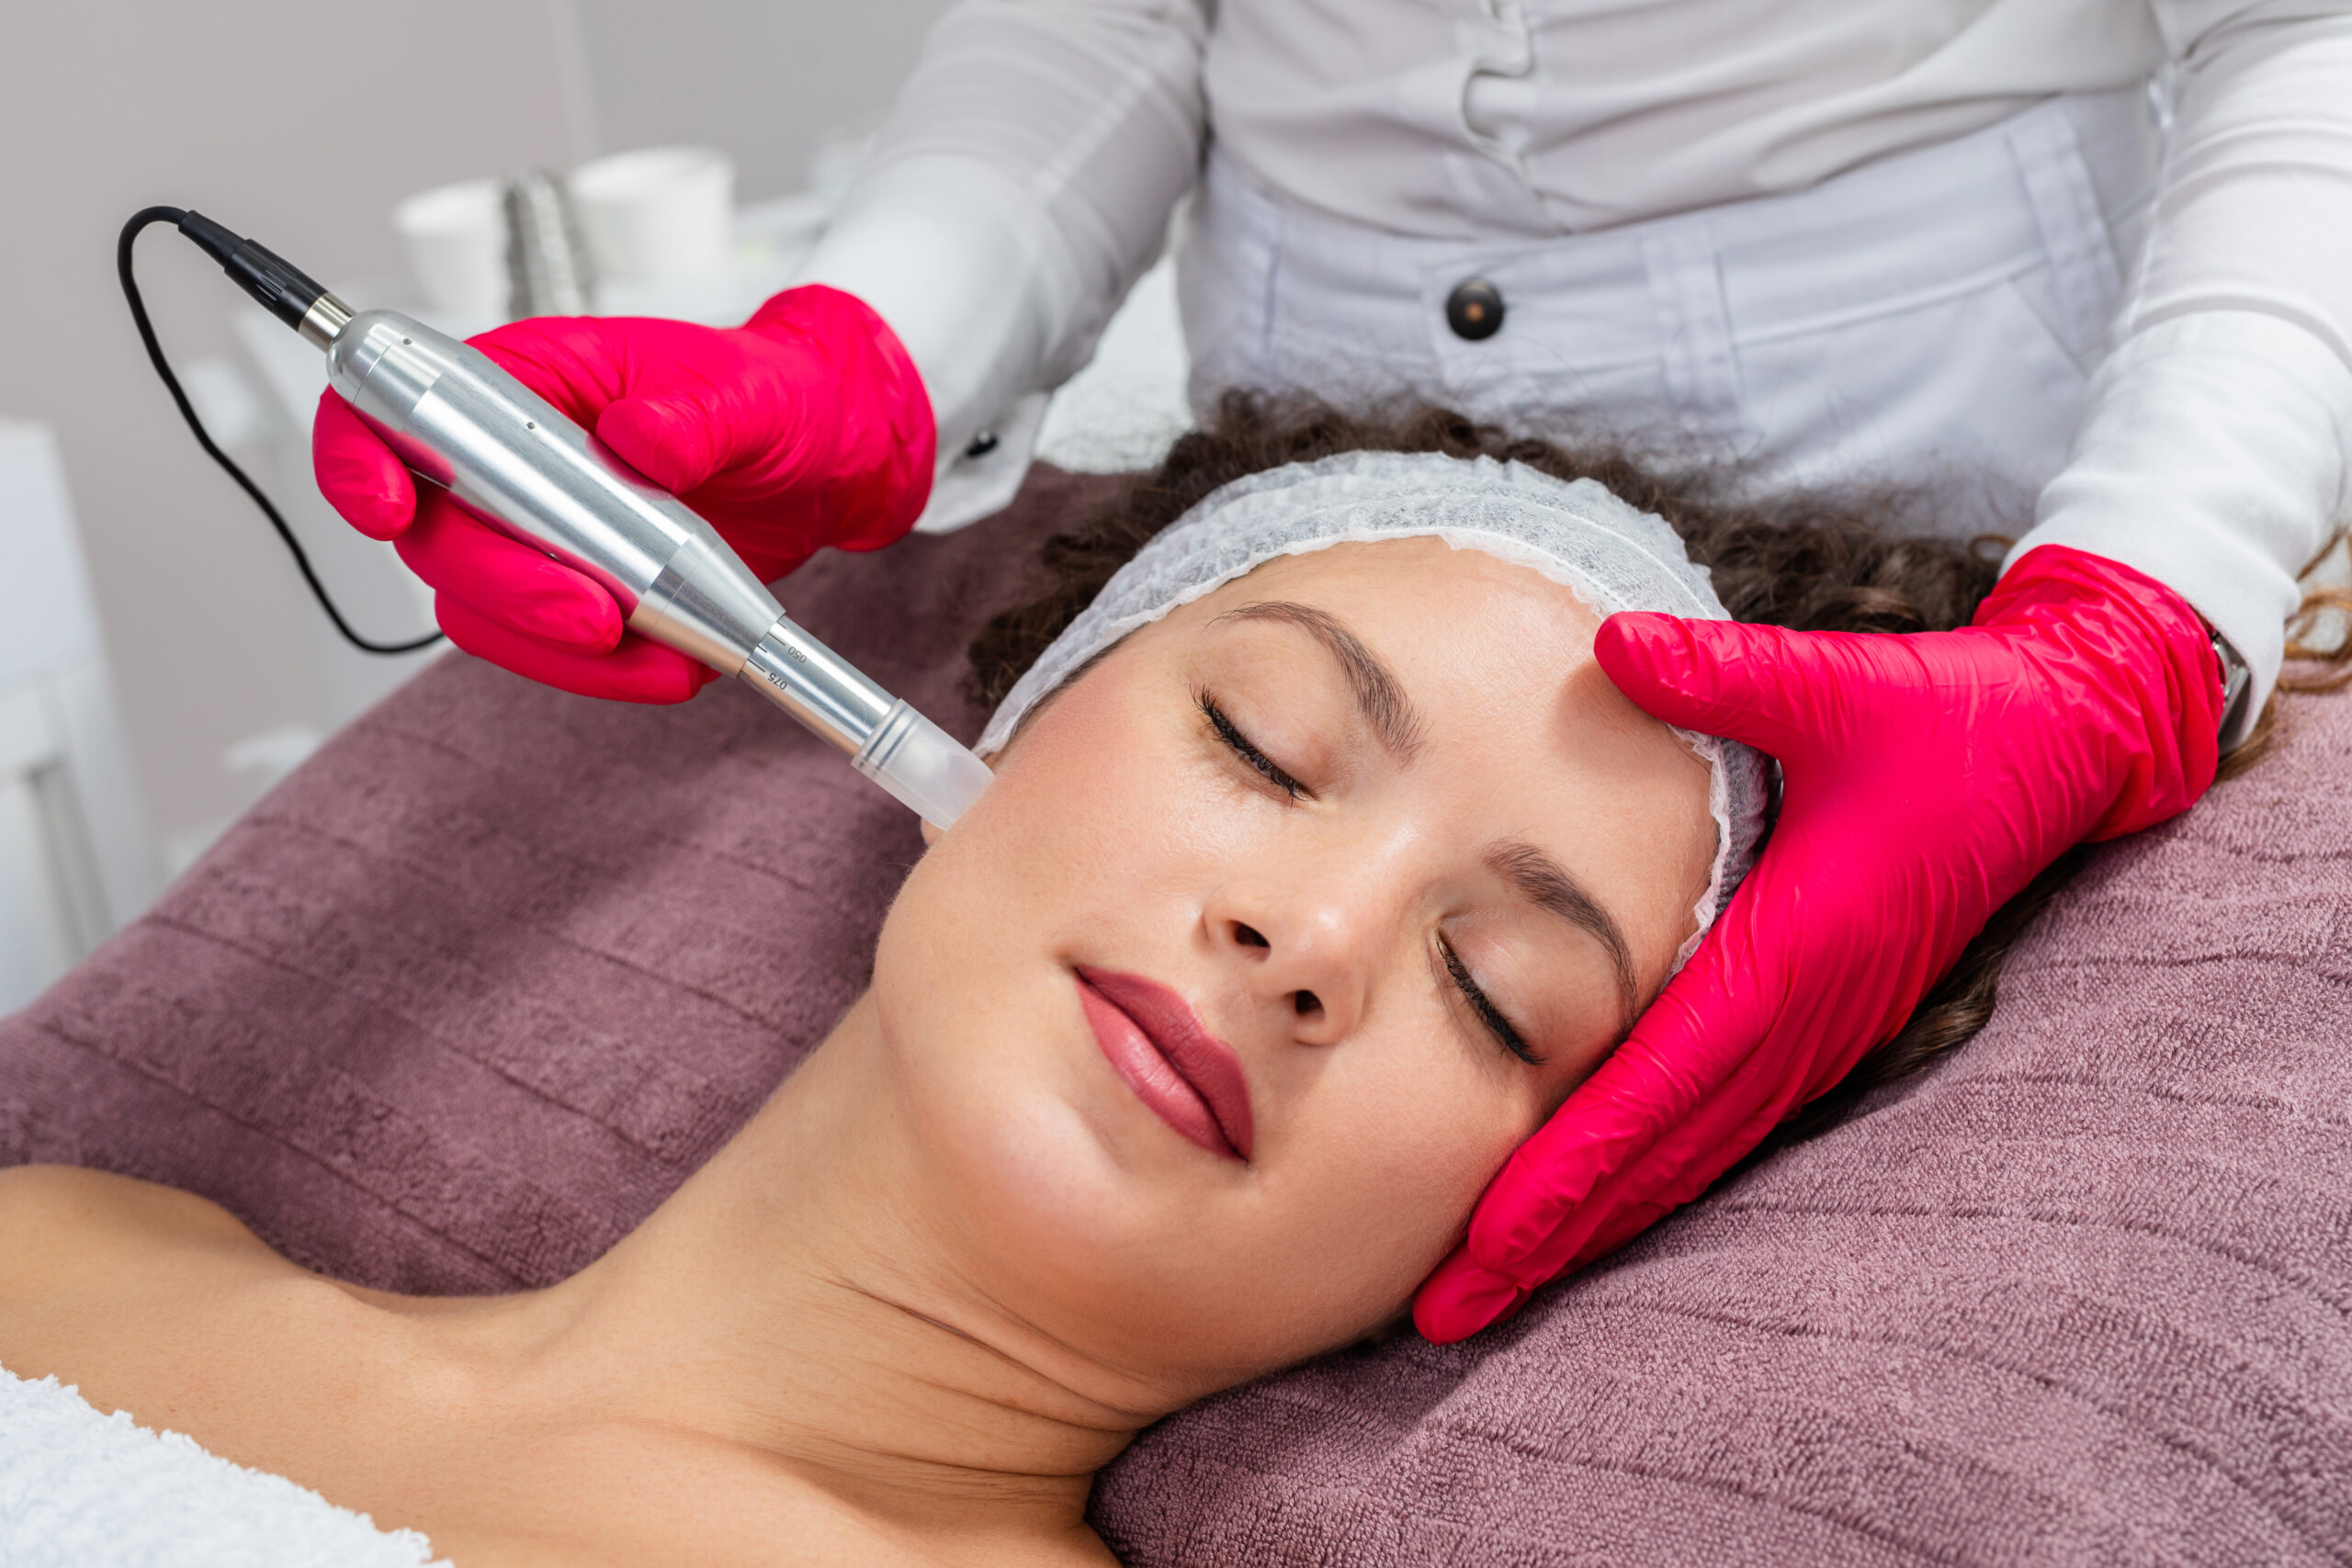 woman receiving microneedling treatment on face